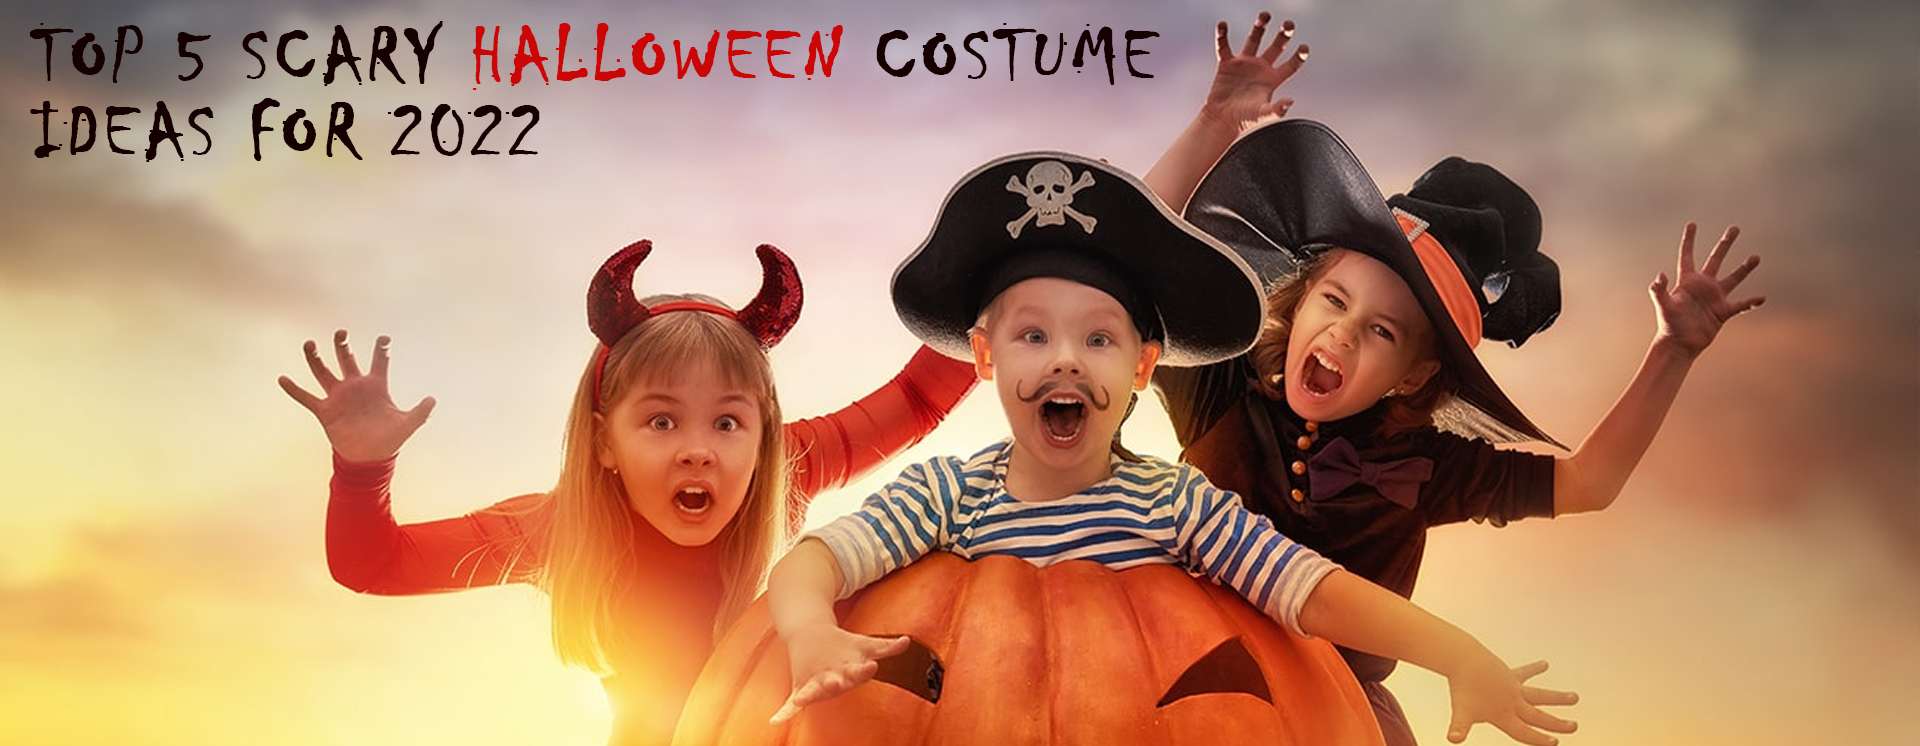 Scary Halloween Costume Top 5 Scary Halloween Costumes Ideas For 2022